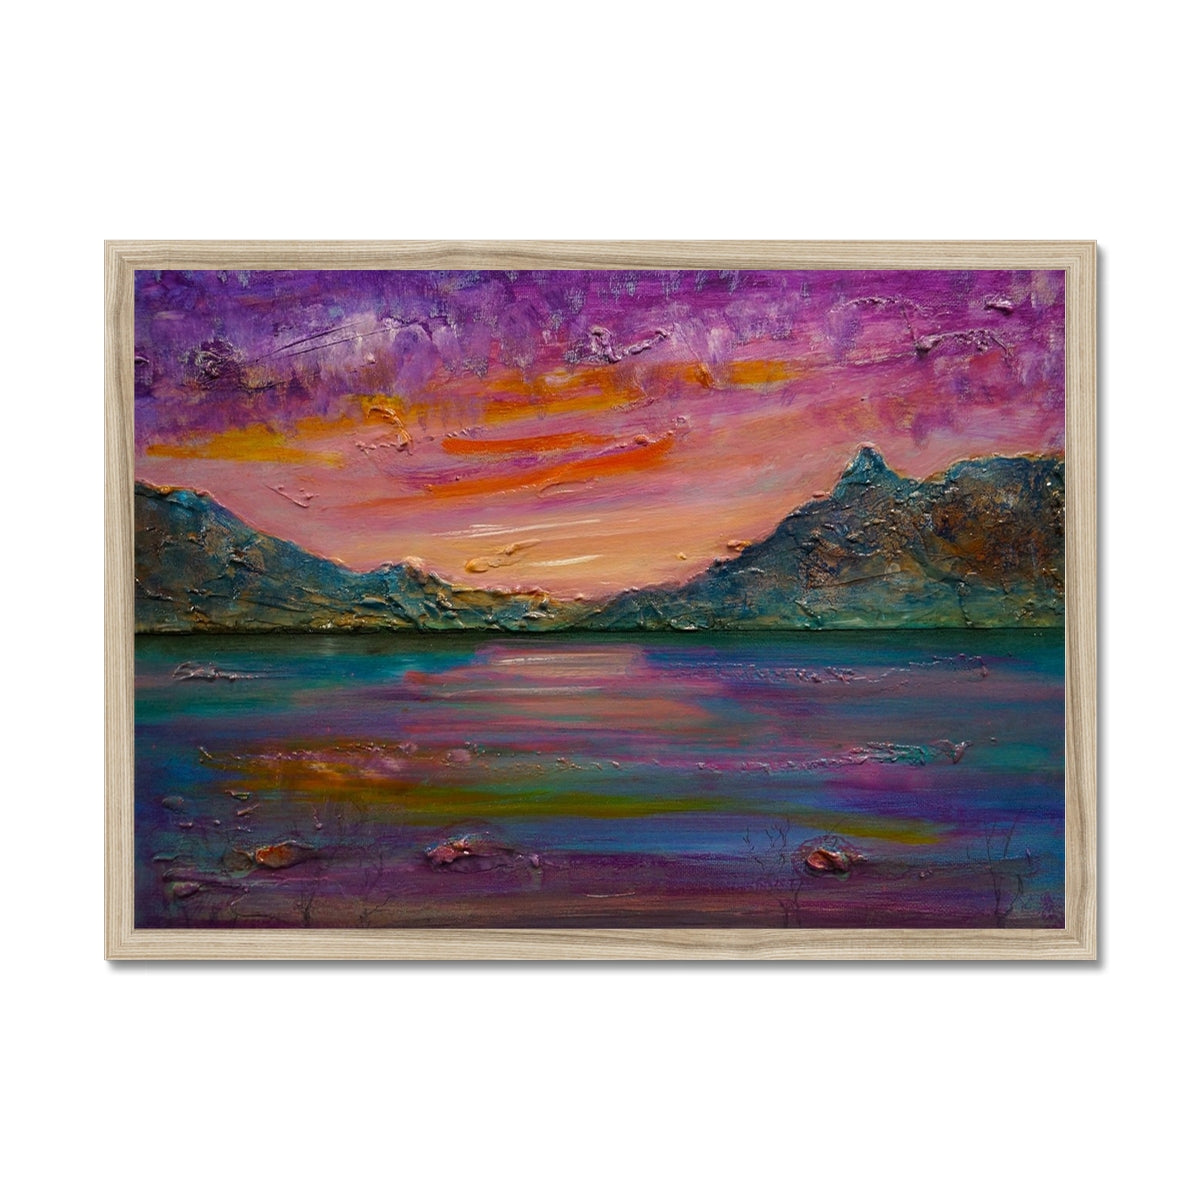 Loch Leven Sunset Painting | Framed Prints From Scotland-Framed Prints-Scottish Lochs & Mountains Art Gallery-A2 Landscape-Natural Frame-Paintings, Prints, Homeware, Art Gifts From Scotland By Scottish Artist Kevin Hunter